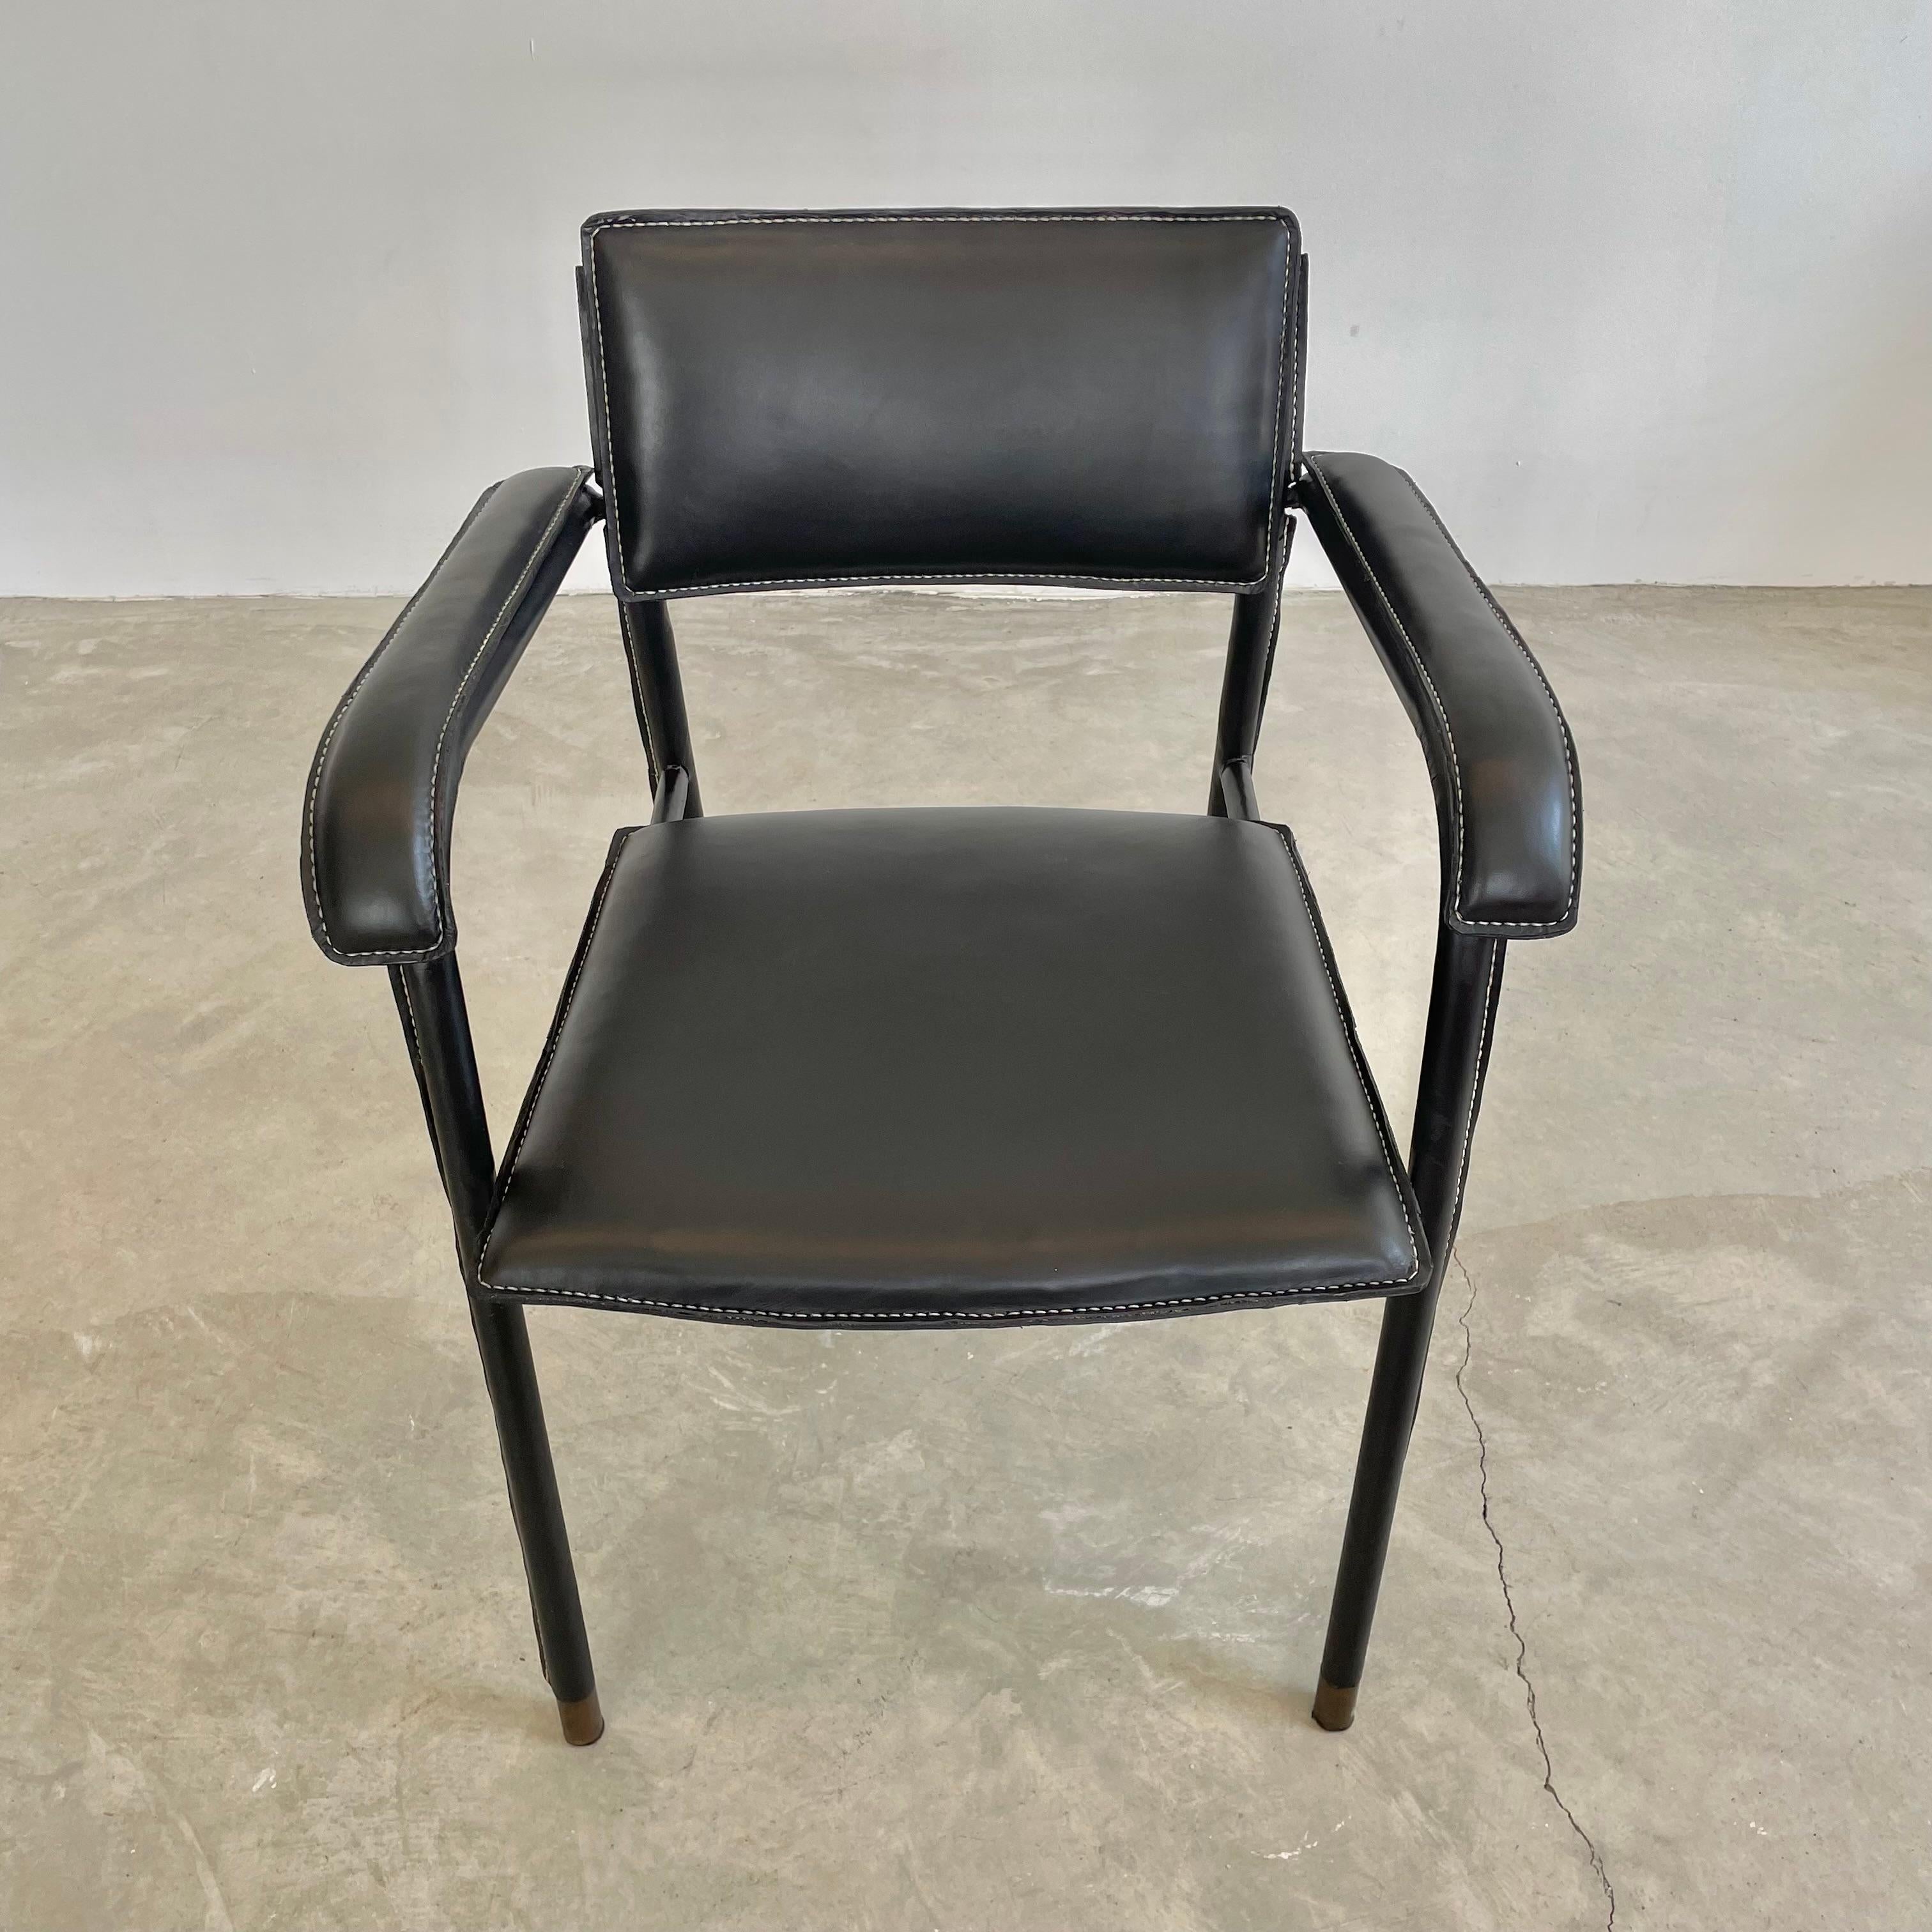 Stunning and rare leather and metal armchair by French designer Jacques Adnet. This chair is completely wrapped in expertly hand-stitched black leather with brass capped feet and brass hardware detailing on floating backrest and under the waterfall